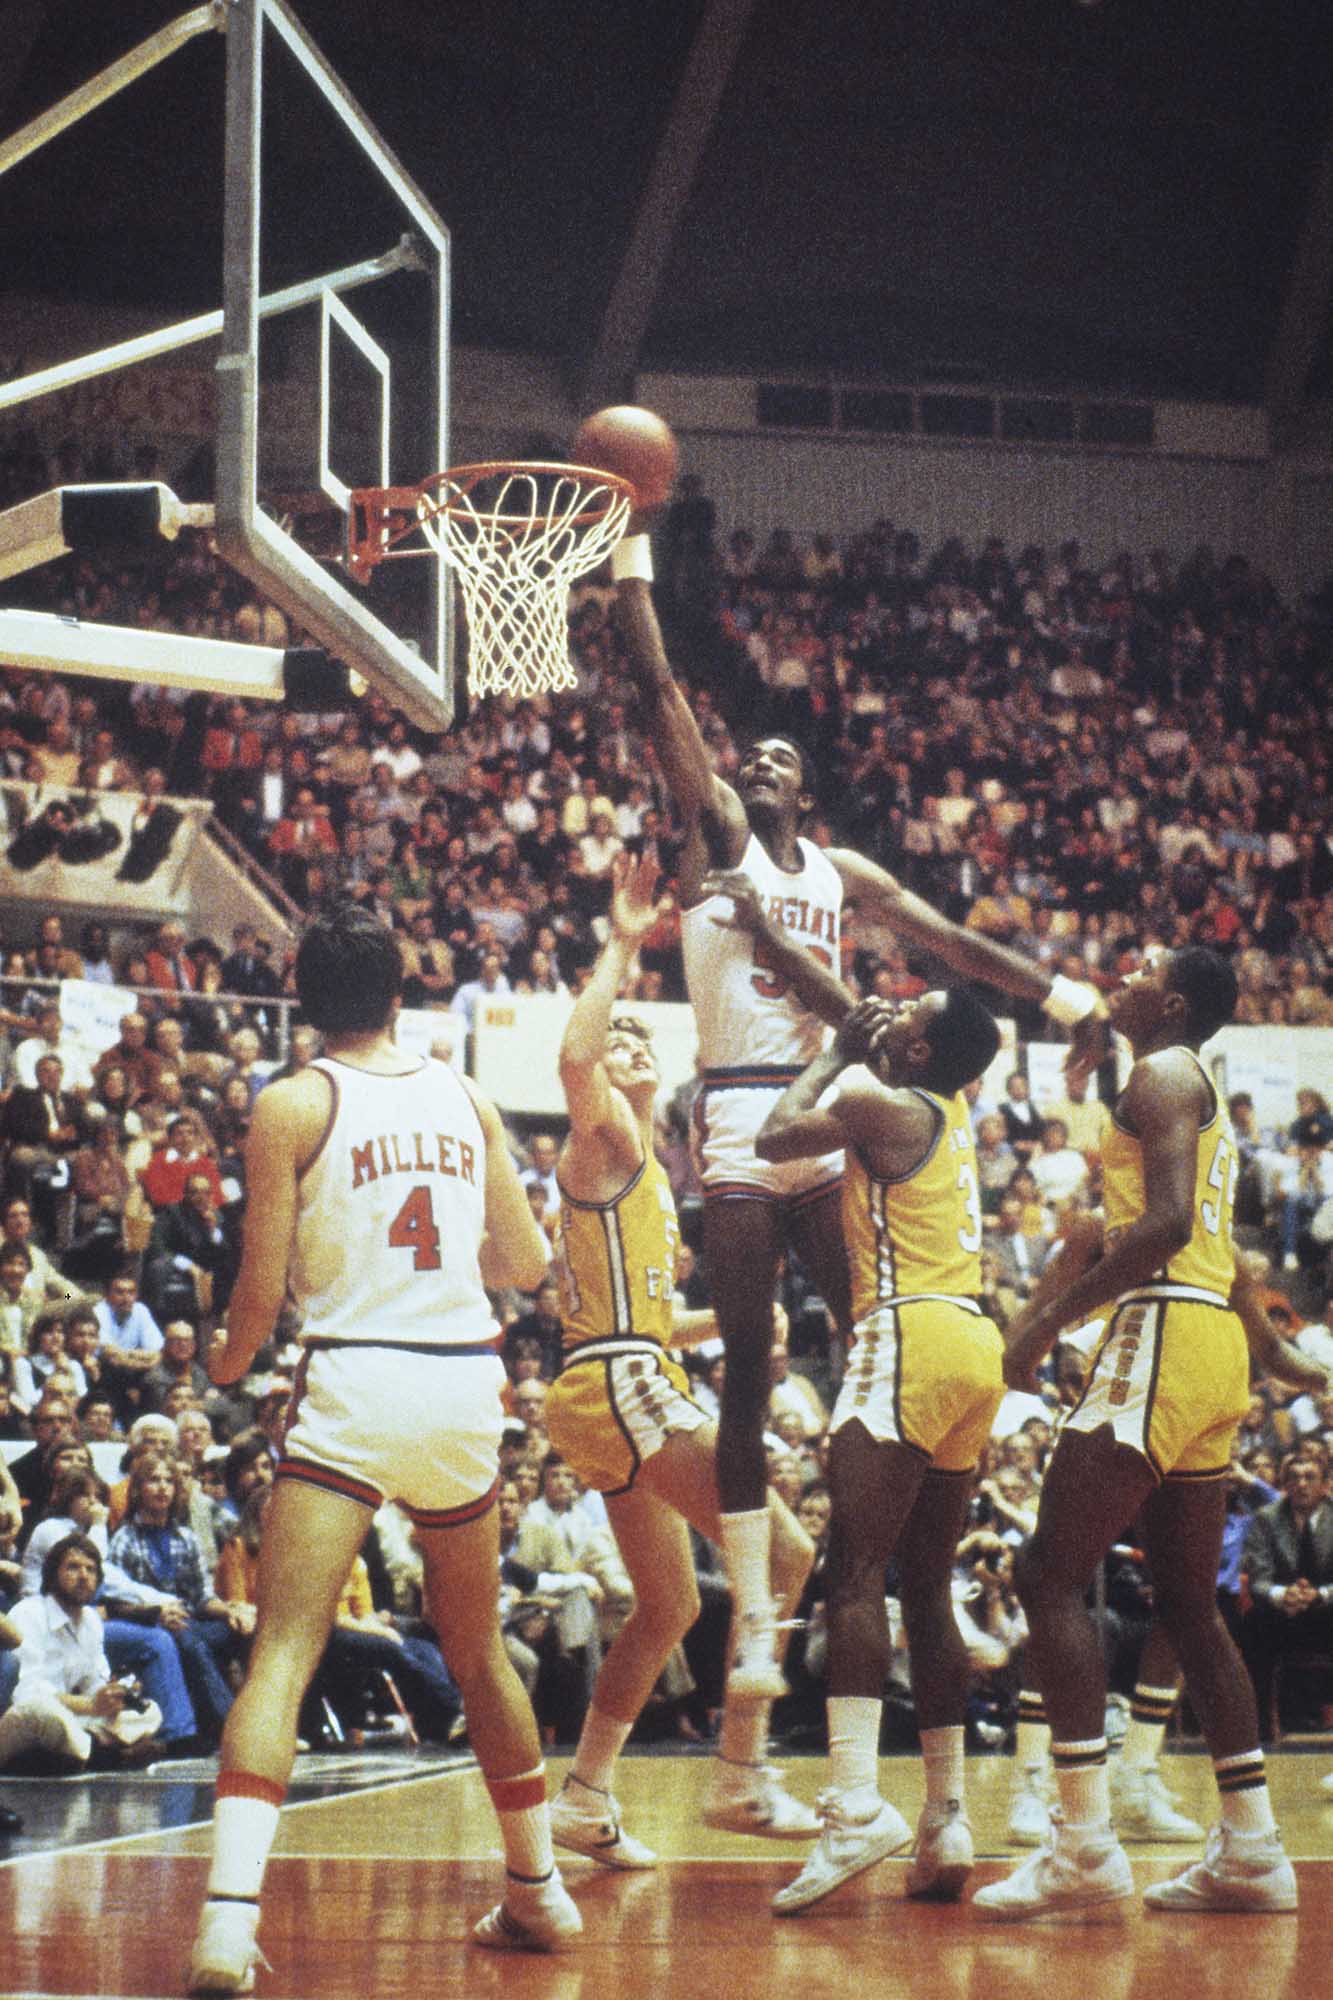 Old image of Ralph Sampson jumping above his opponents to dunk the ball